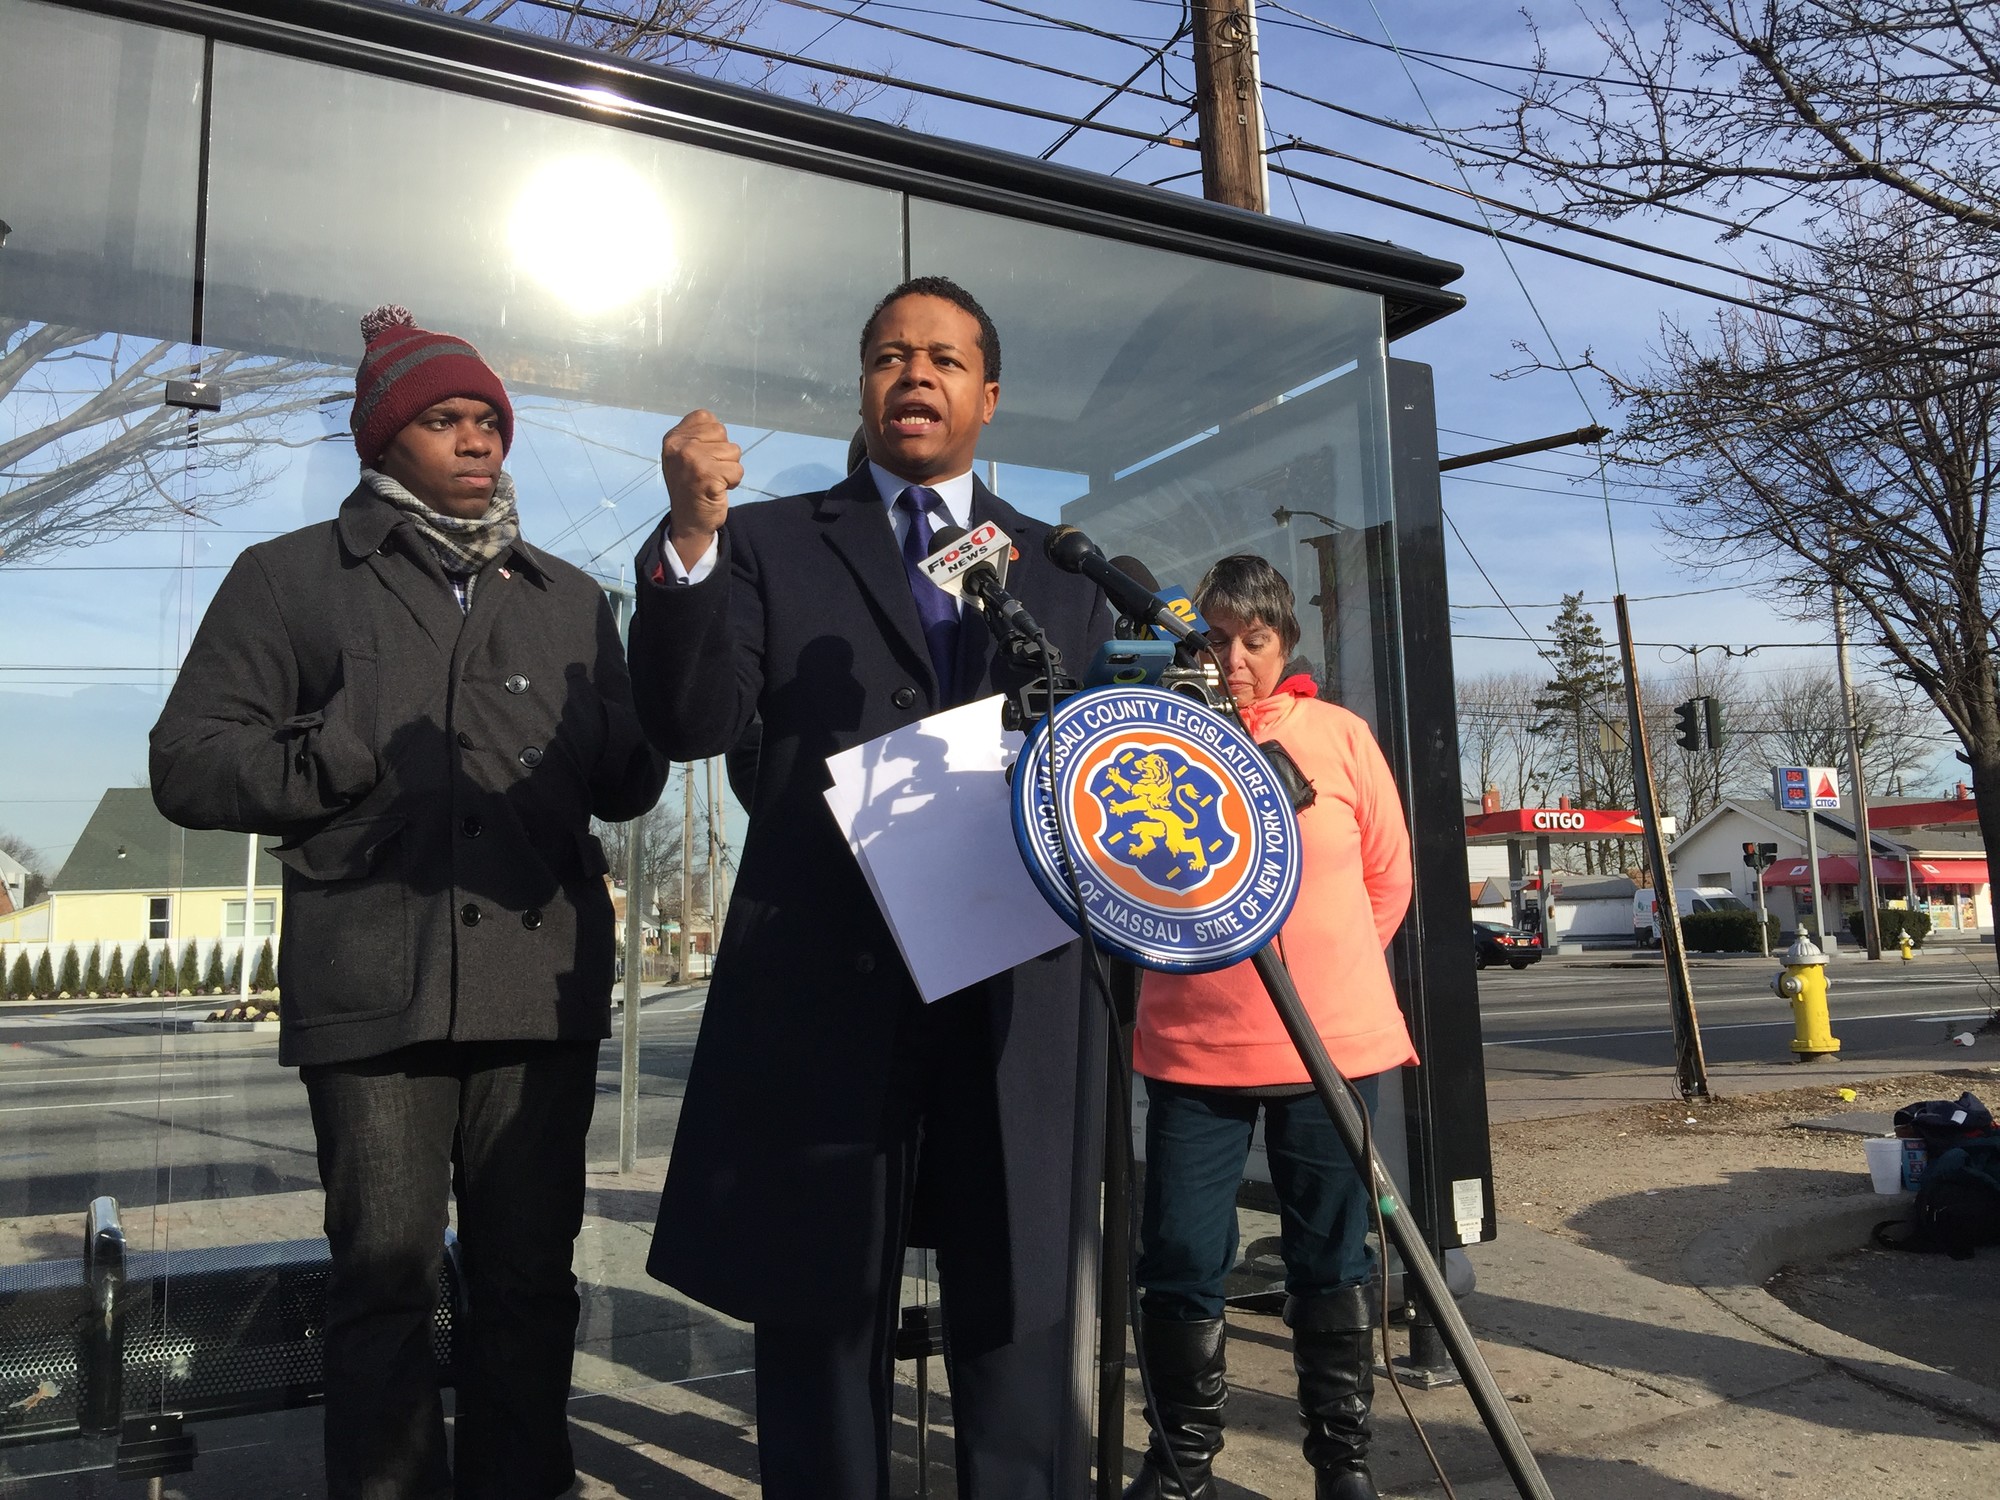 County Legislator Carrié Solages held a press conference in front of a bus stop on Hempstead Turnpike in Elmont on Jan. 7, and asked County Executive Ed Mangano for a two-month freeze on cuts to the system.